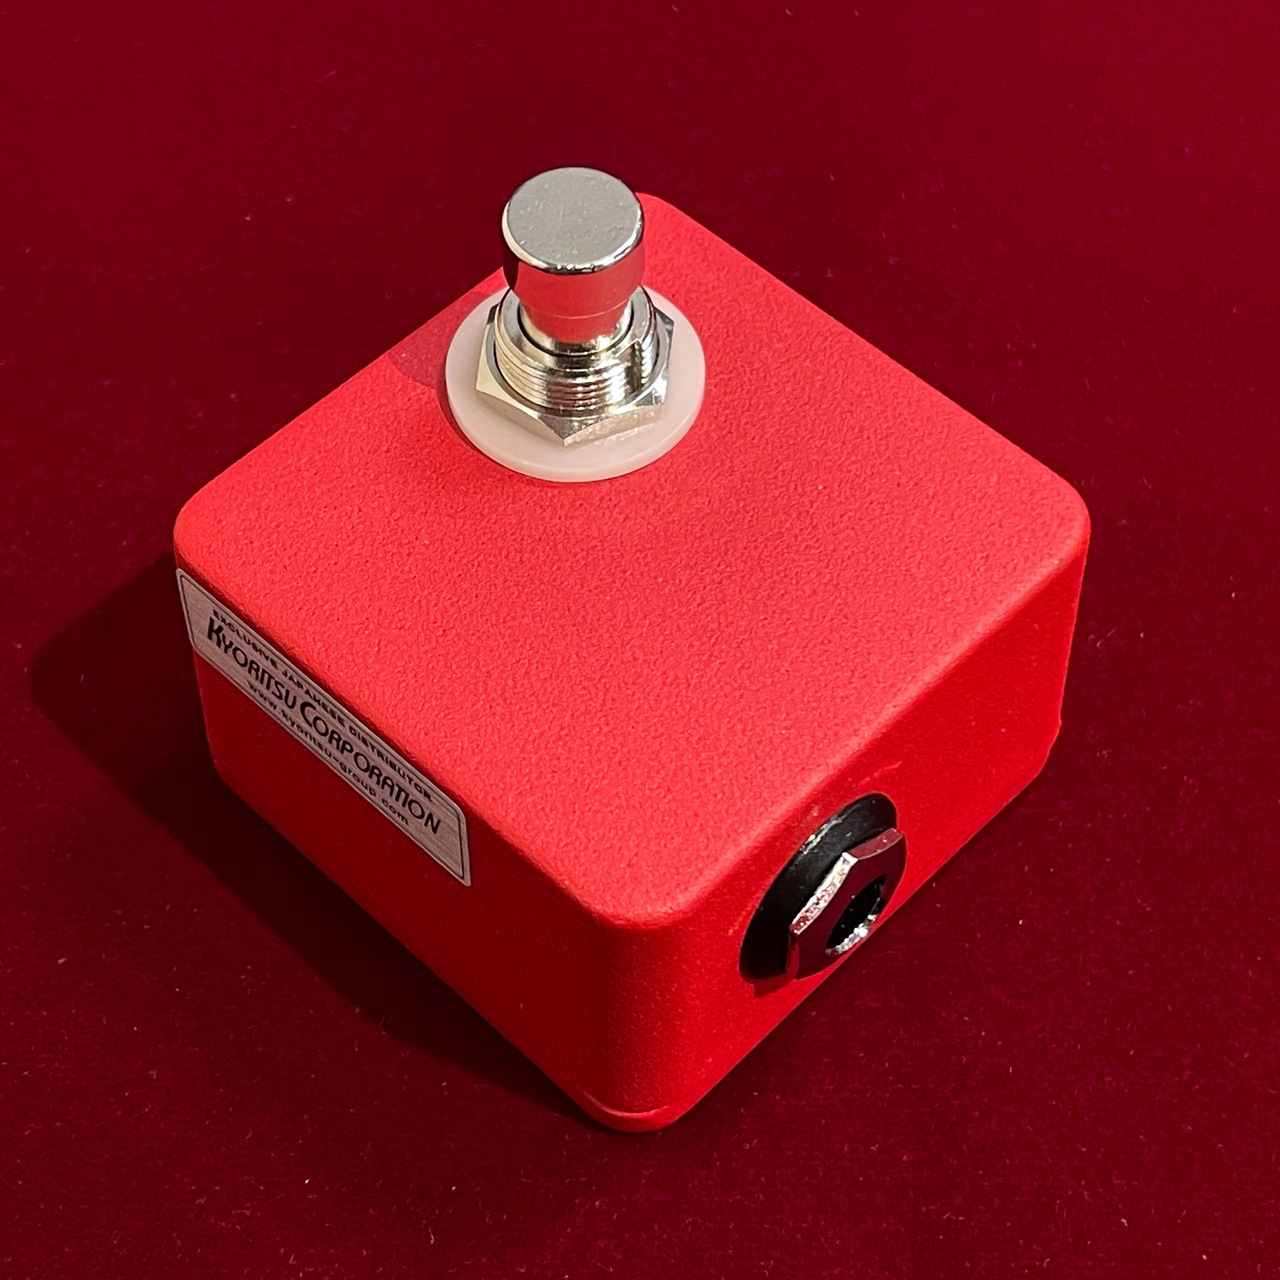 JHS Pedals Morning Glory V4 + Red Remote 【専用フットスイッチの 